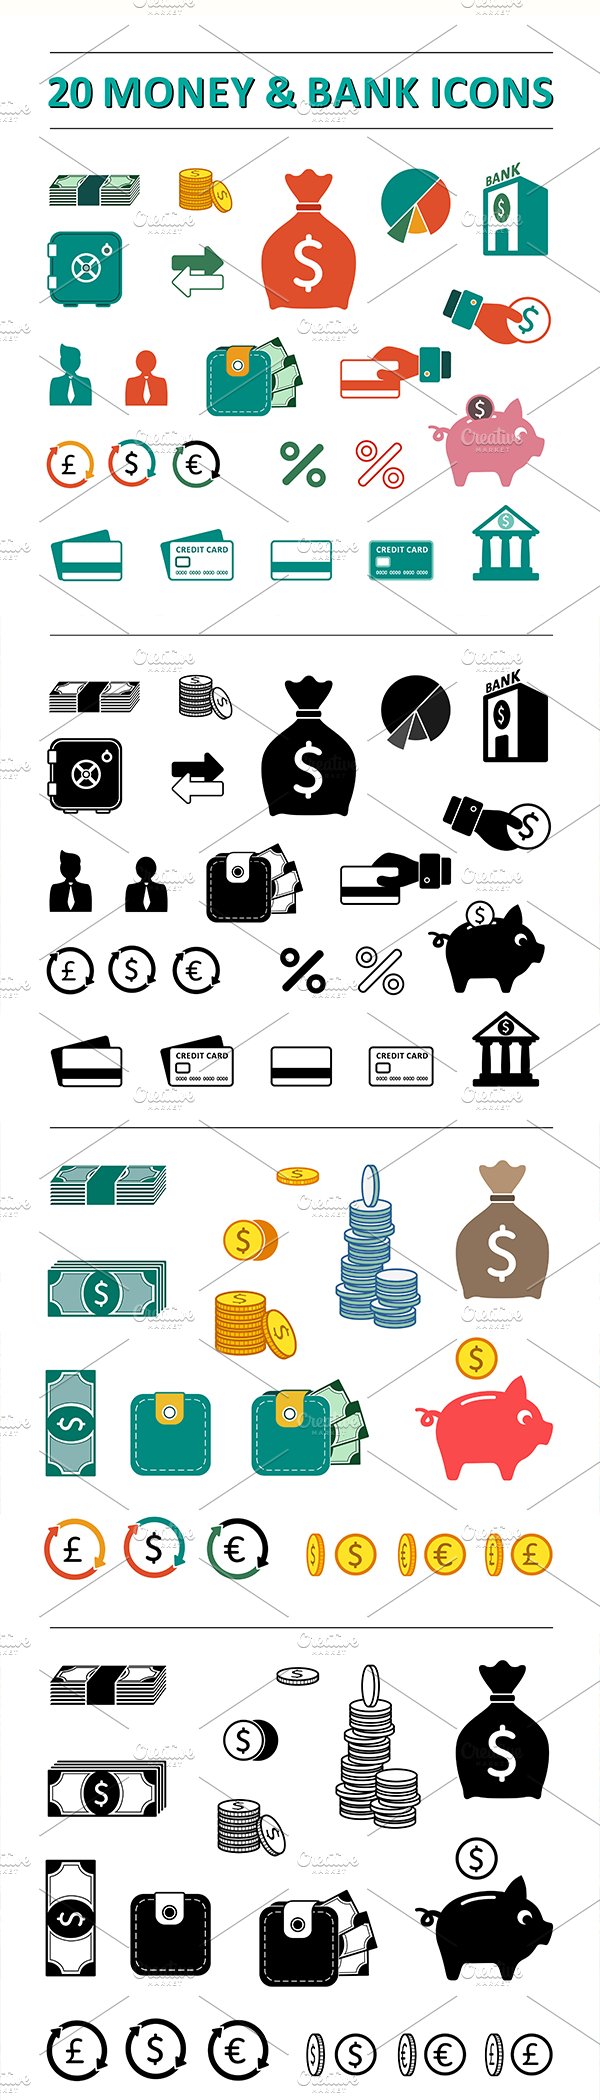 Money & bank icons preview image.